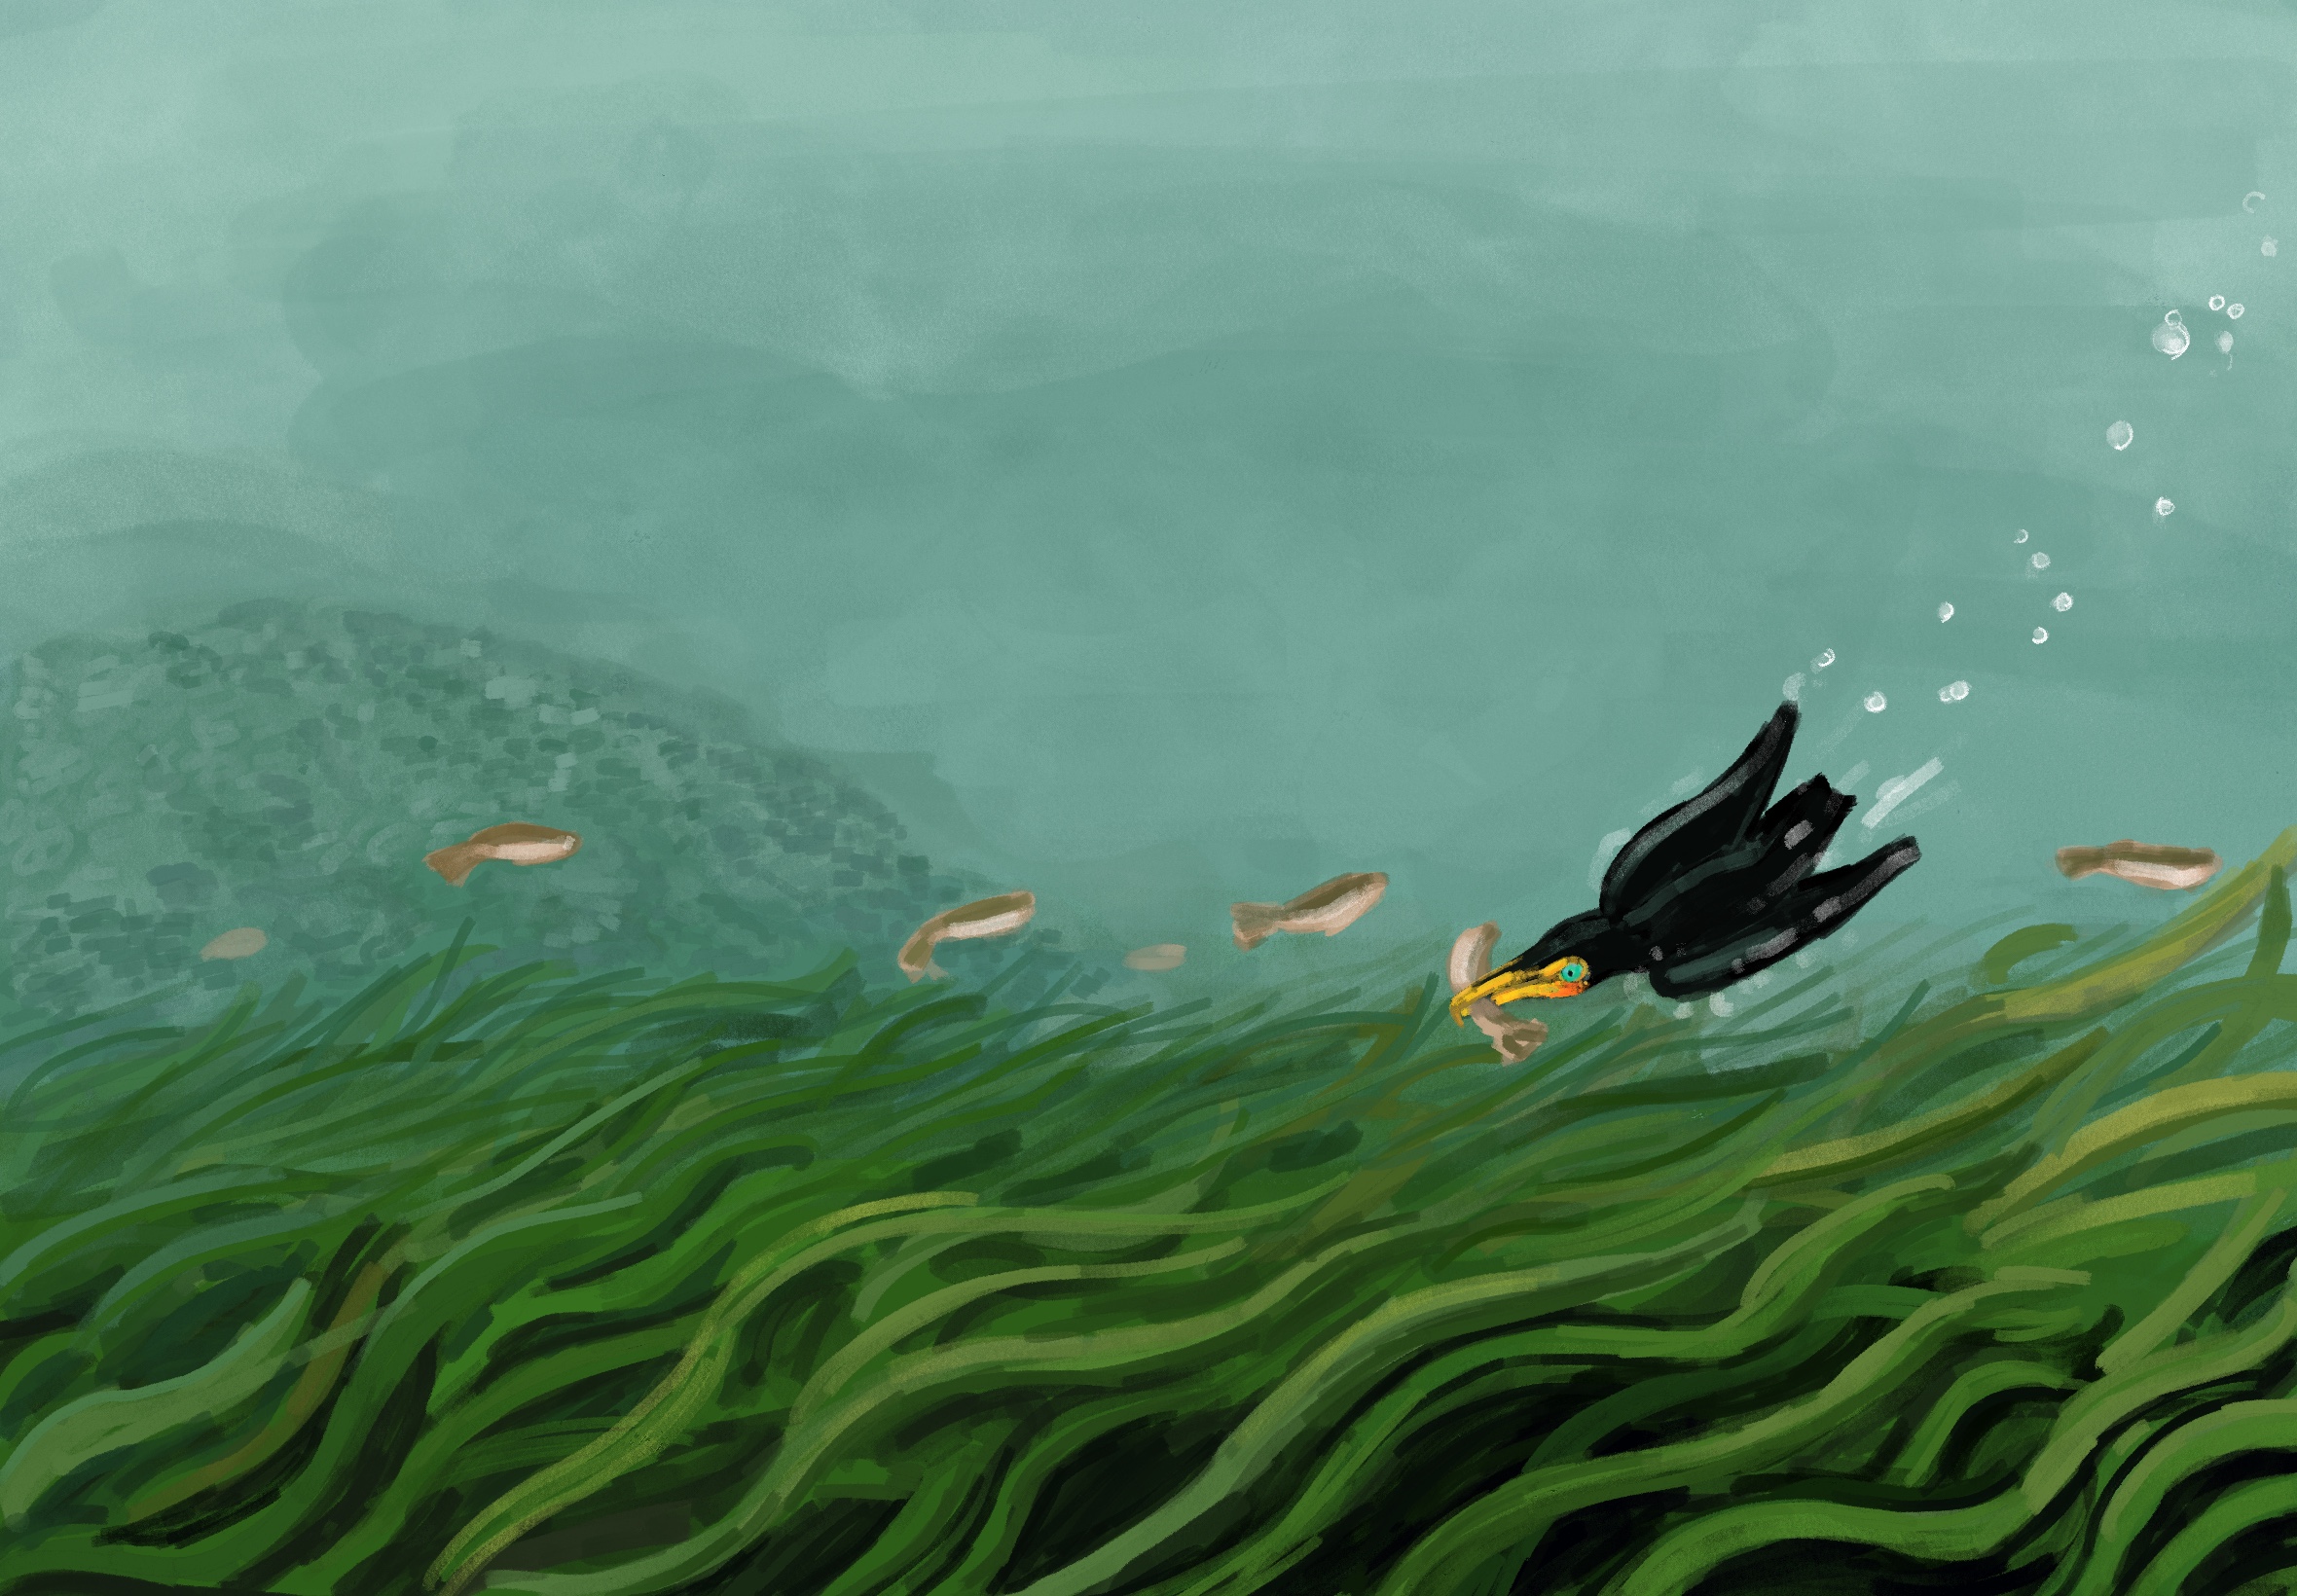 Digital illustration with teals colours, depicting an underwater scene of seagrass, with a cormorant diving.